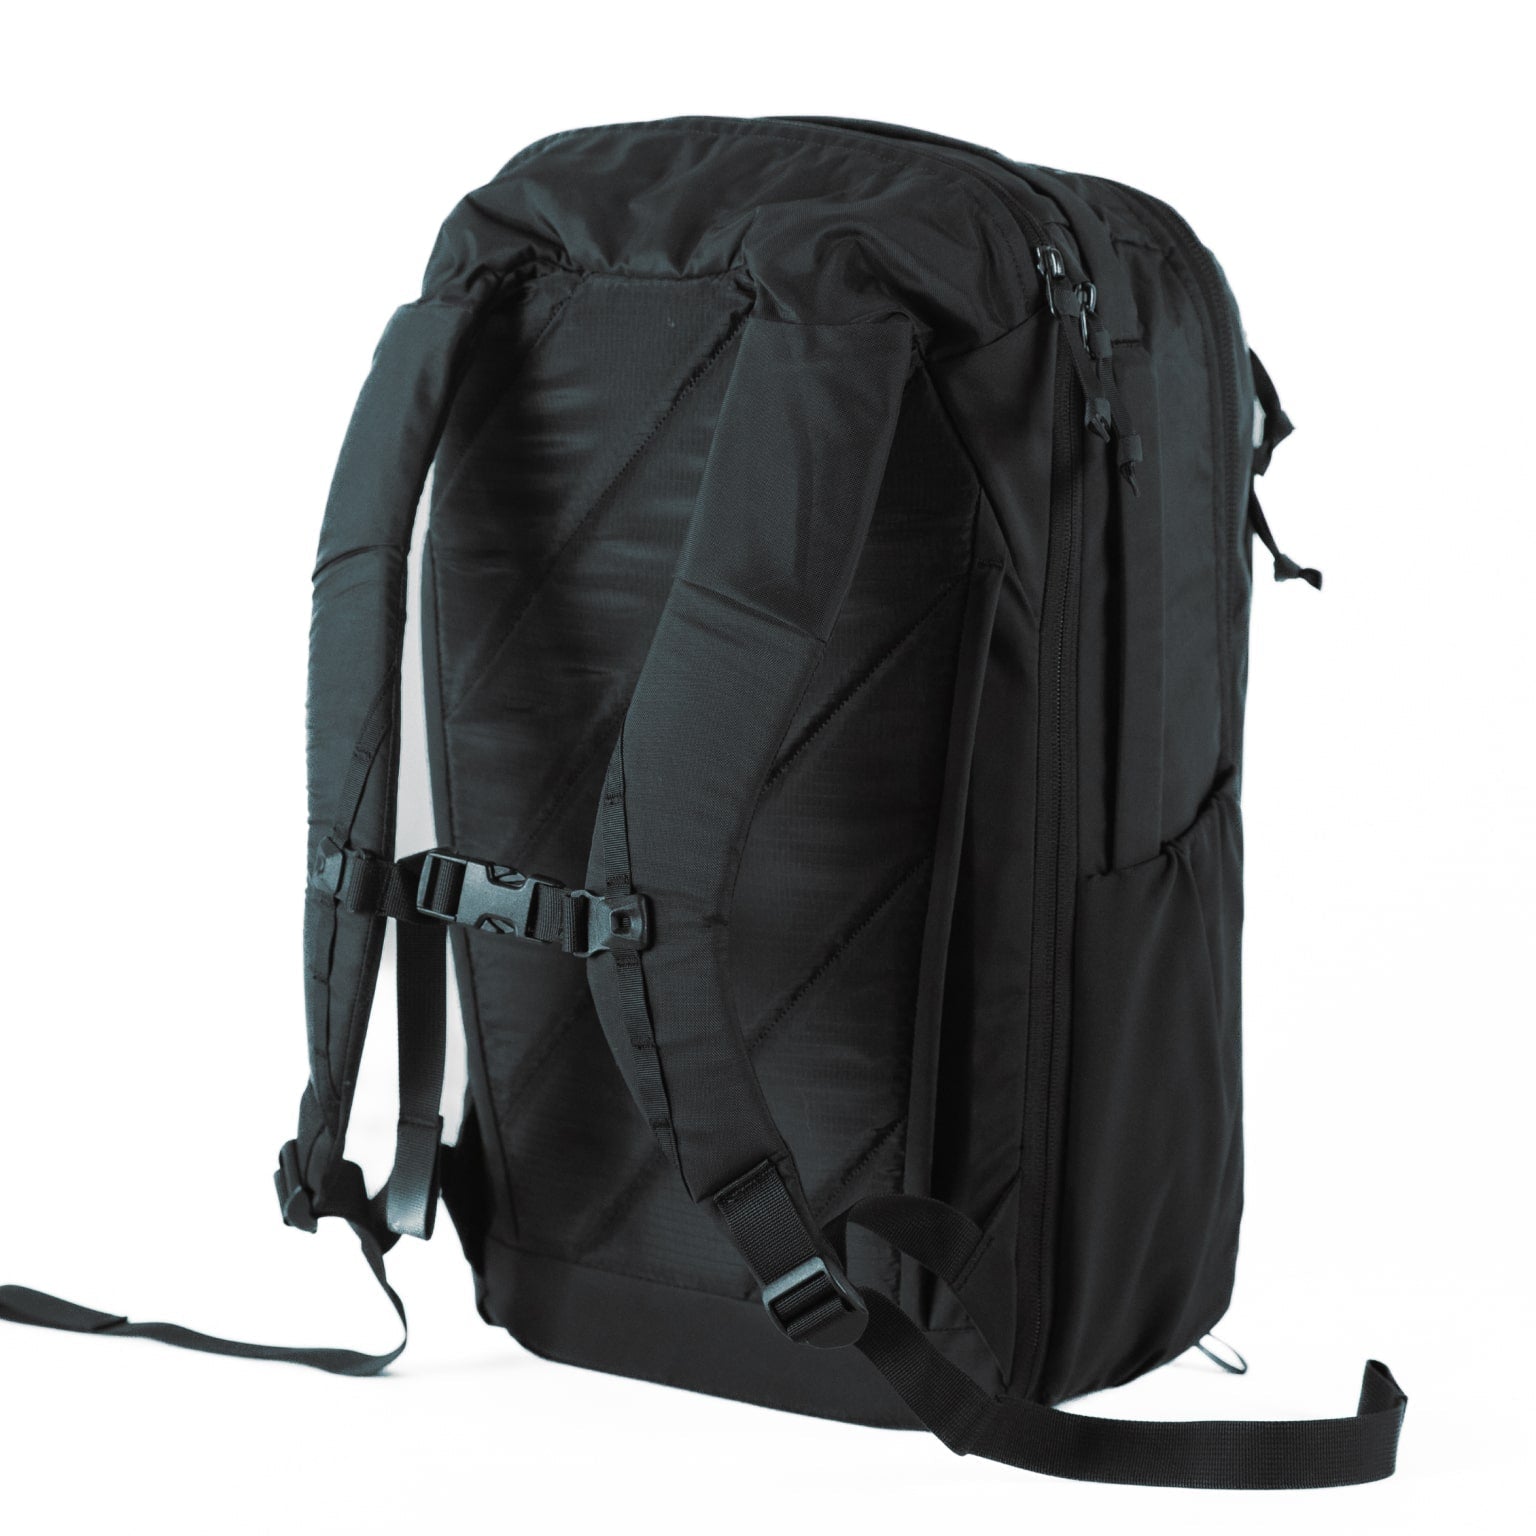 Evergoods Civic Travel Bags 26L - Storming Gravity